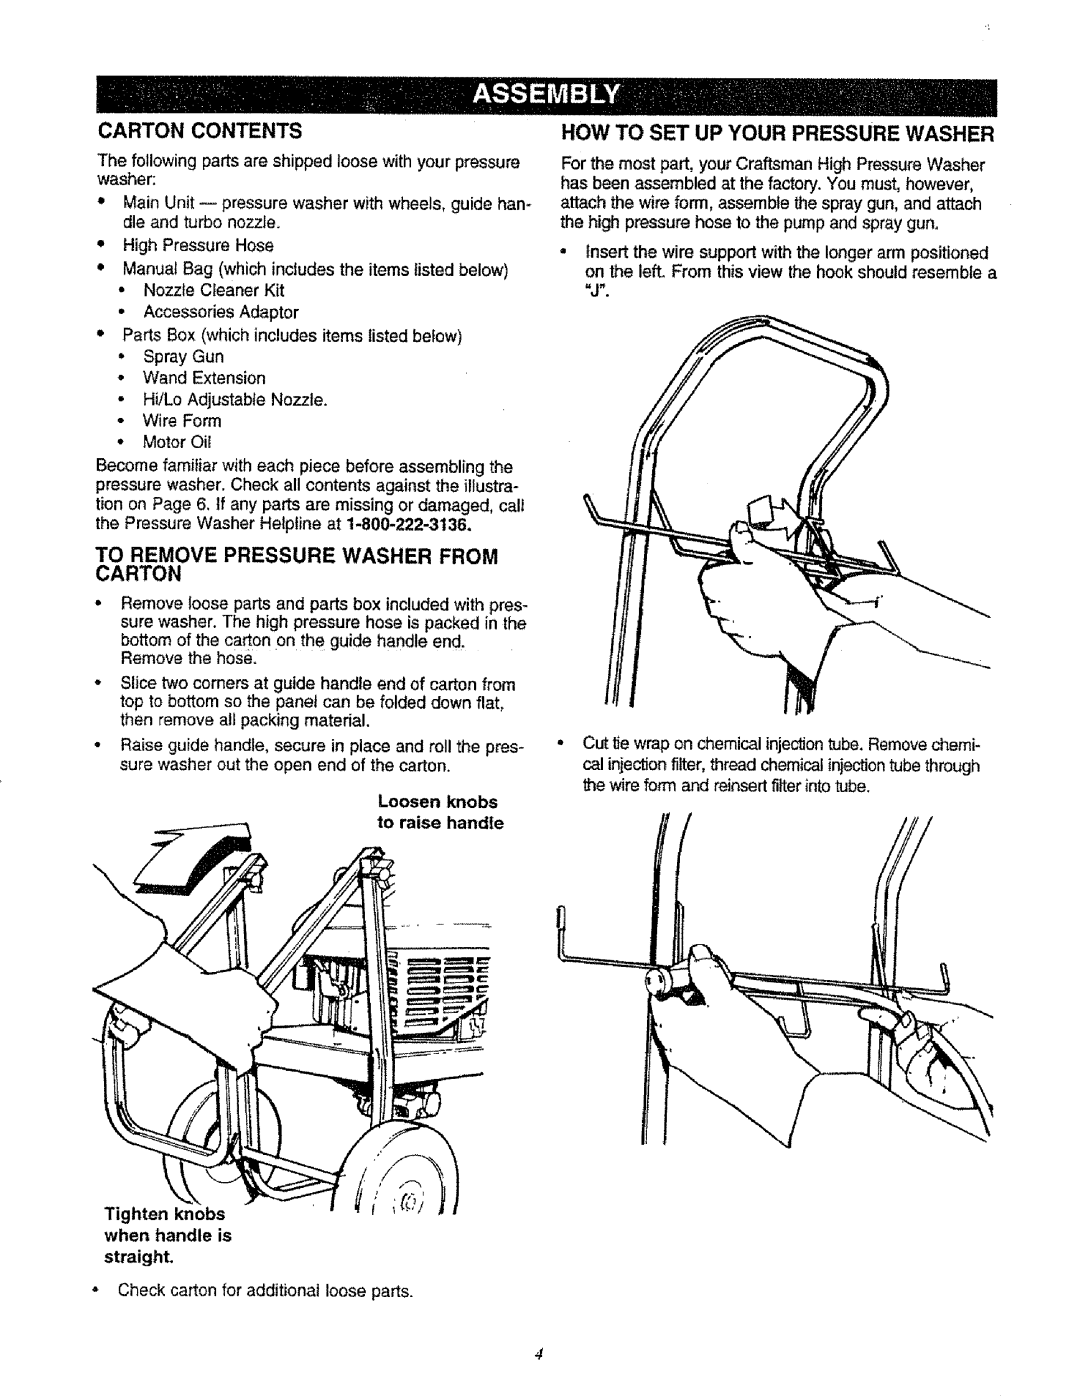 Sears 580.761652 manual Carton Contents, To Remove Pressure Washer From Carton, How To Set Up Your Pressure Washer 